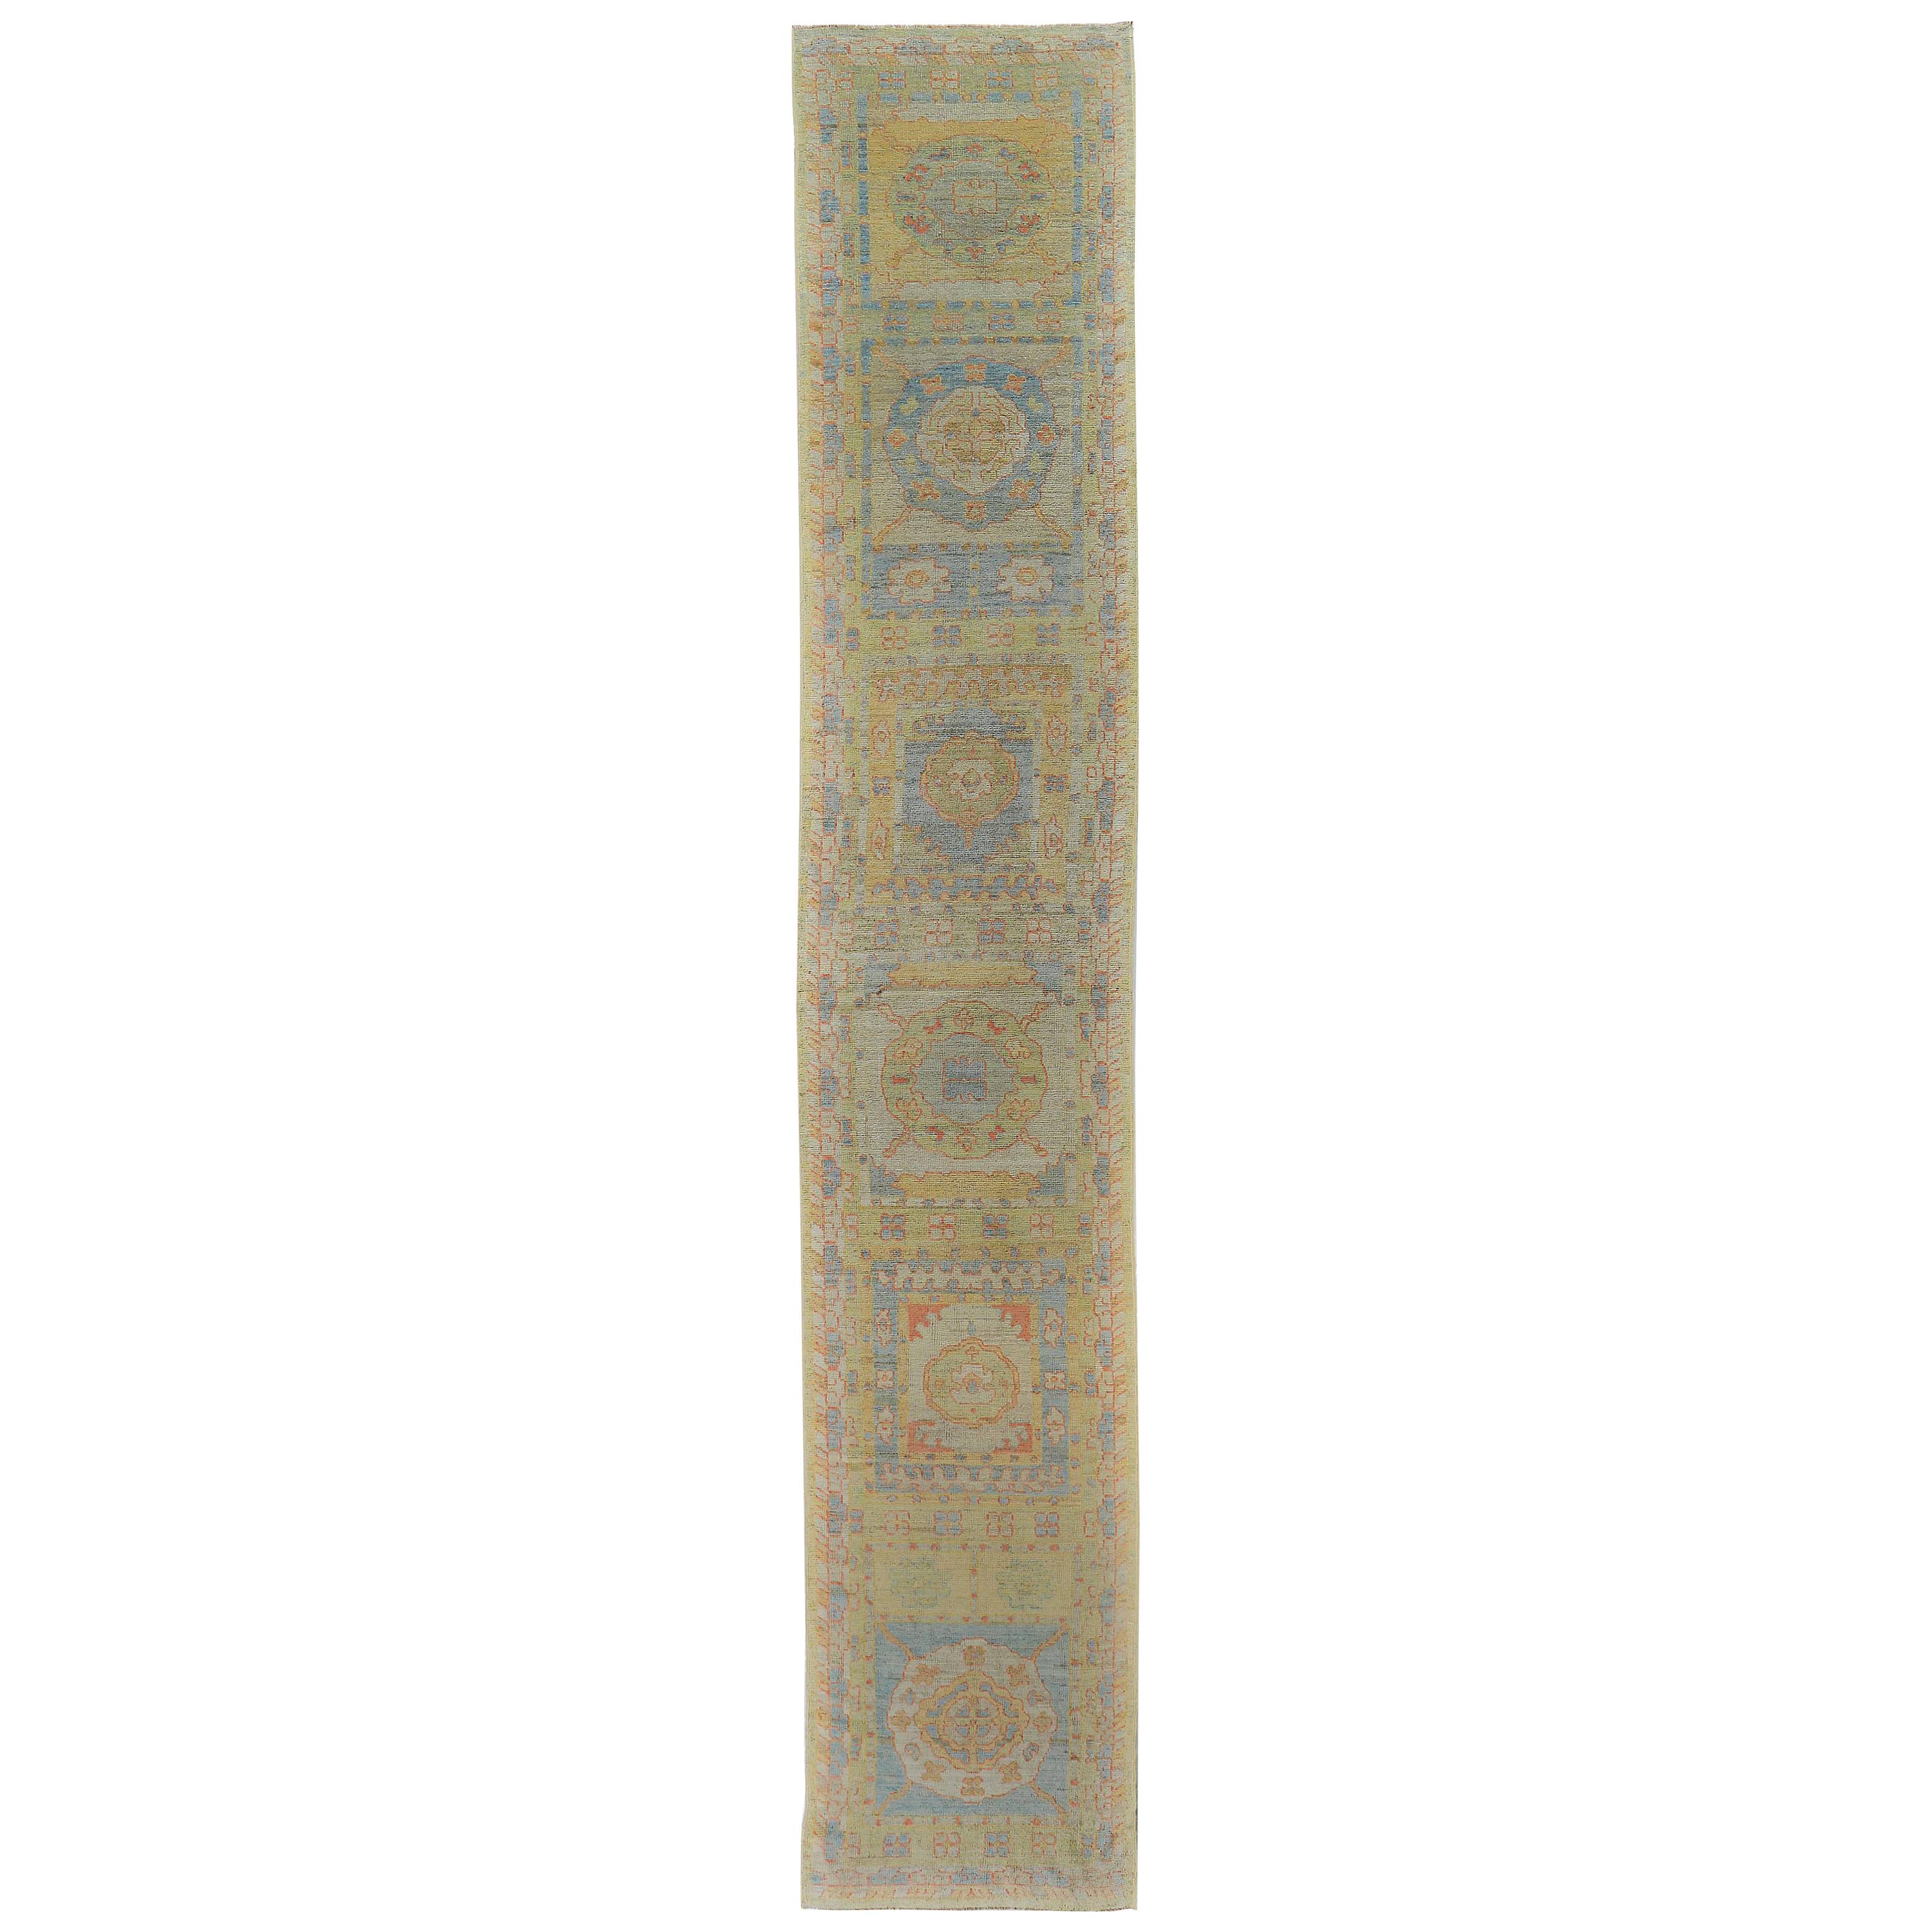 Turkish Oushak Runner Rug with Blue and Green Floral Details on Ivory Field